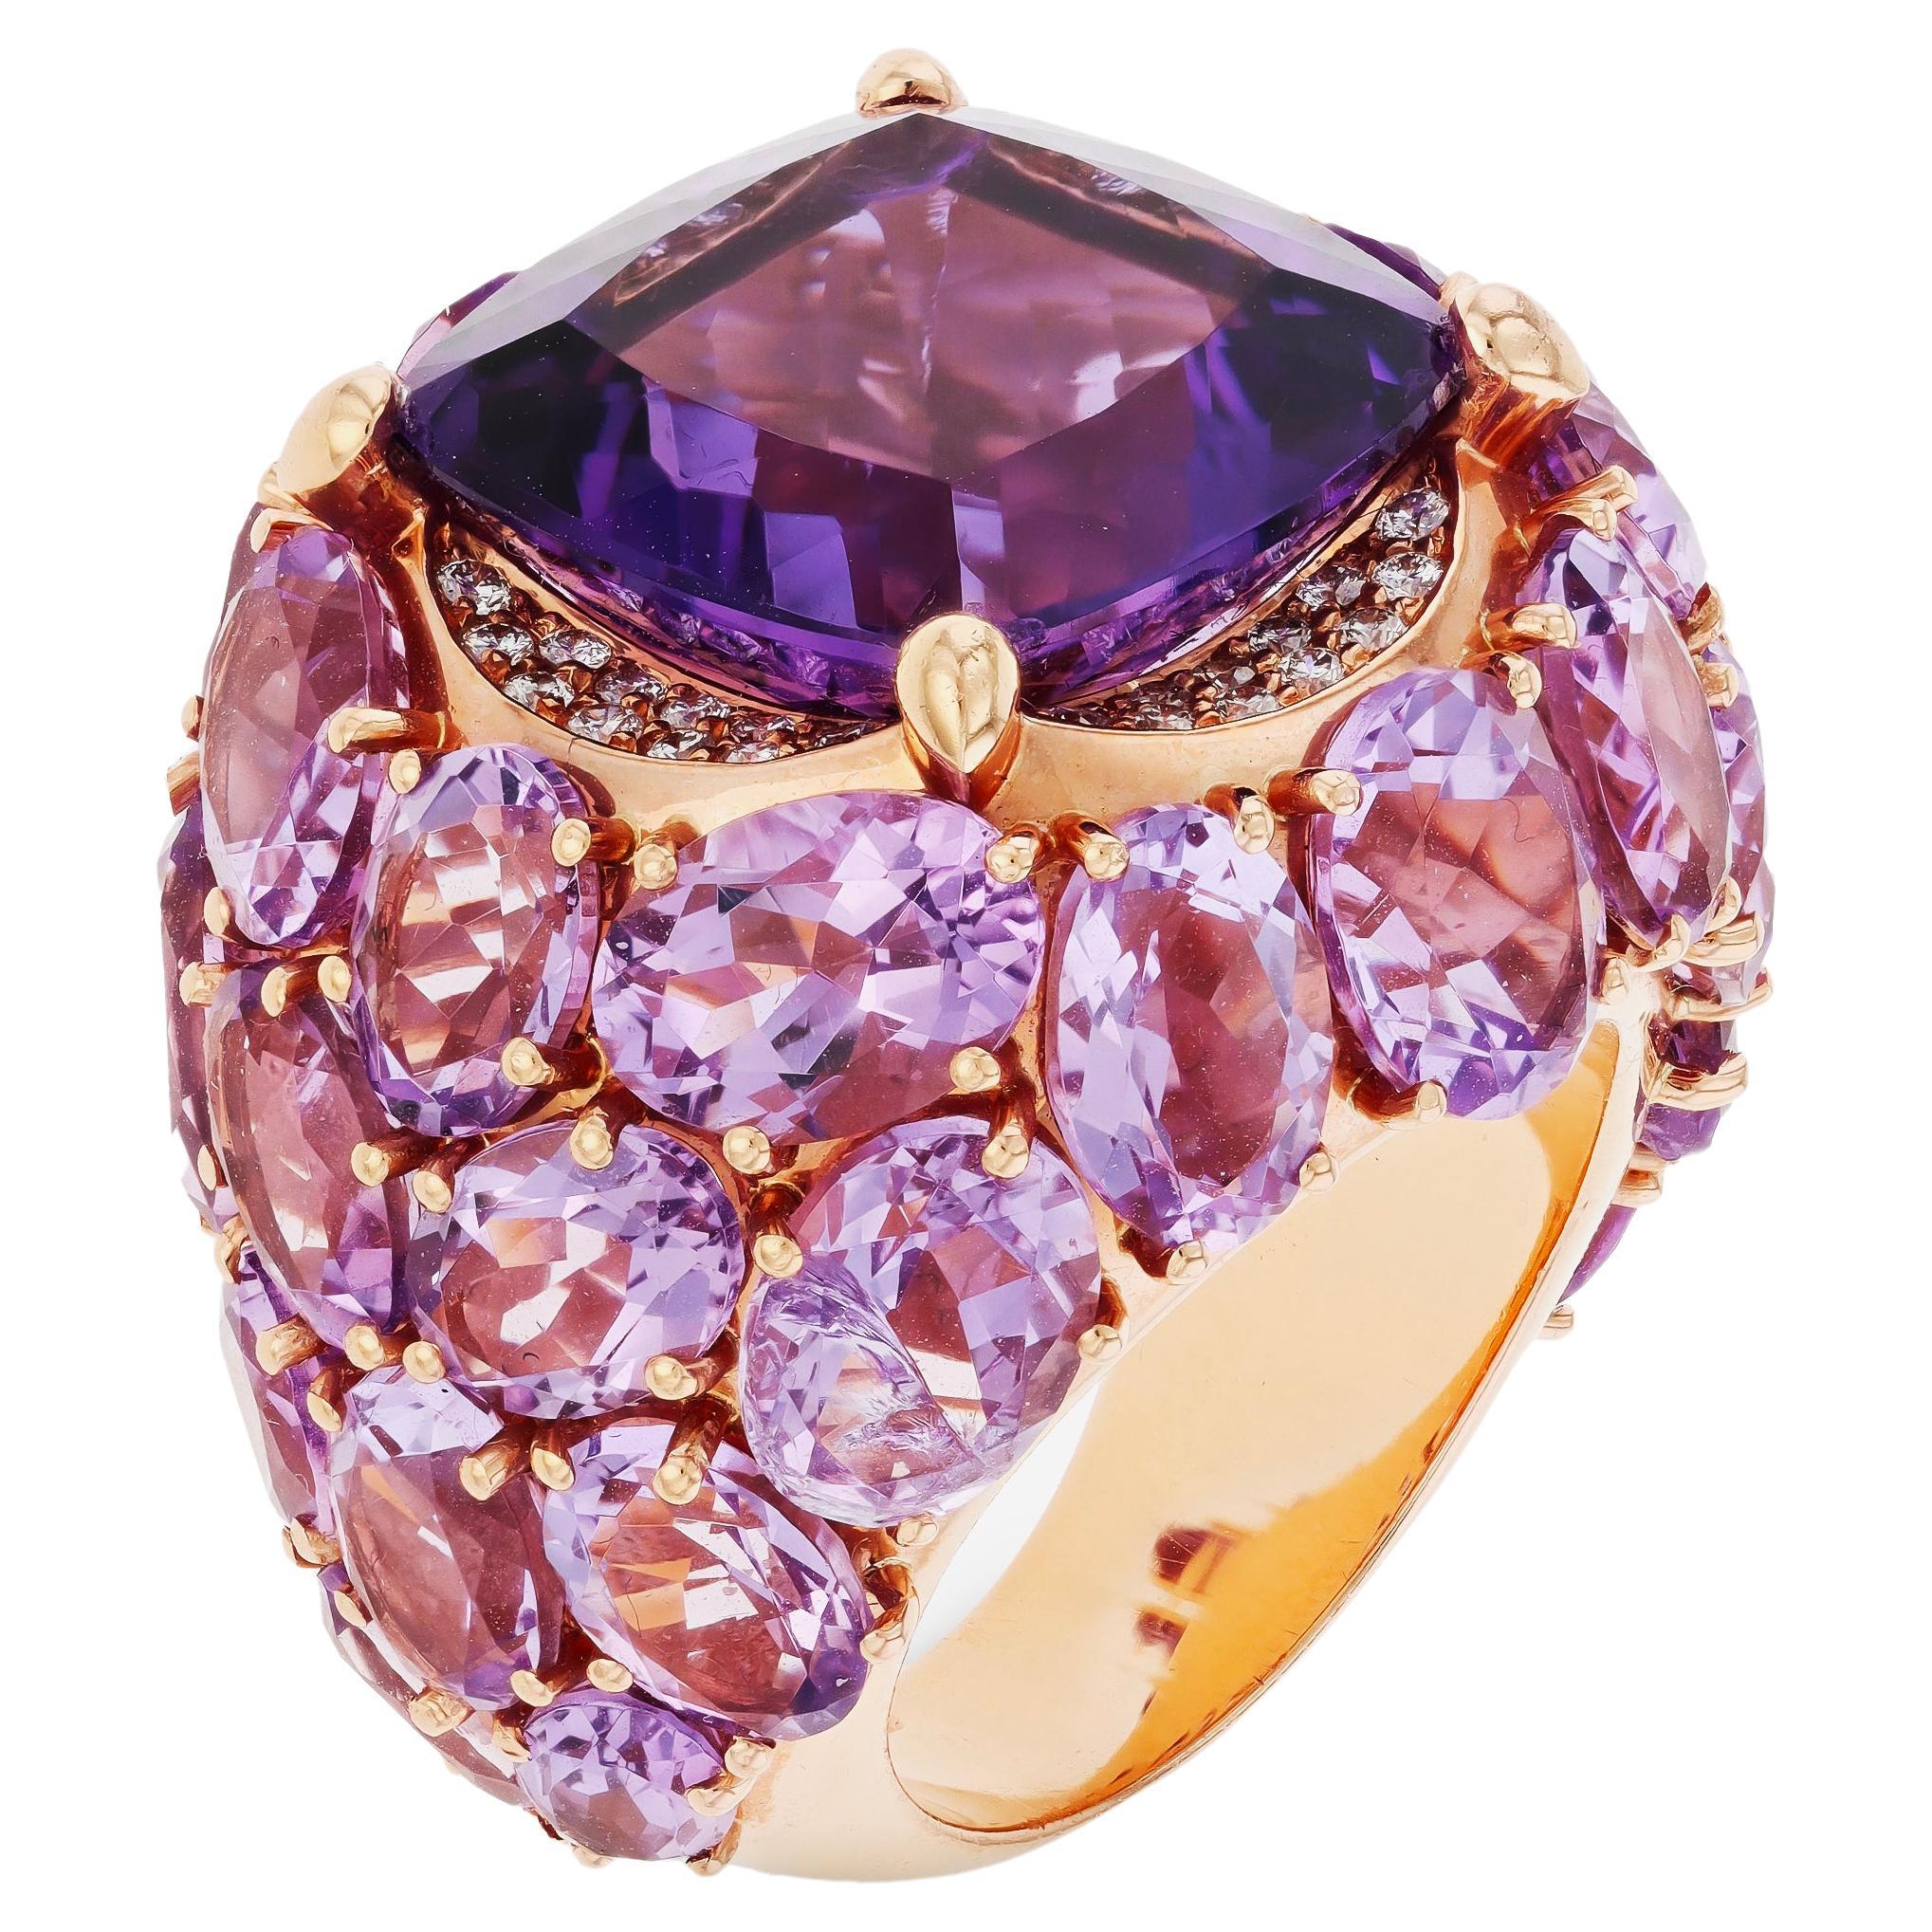 Mimi Milano Boutique 18K Rose Gold Amethyst & Diamond Ring sz 7.25 For Sale